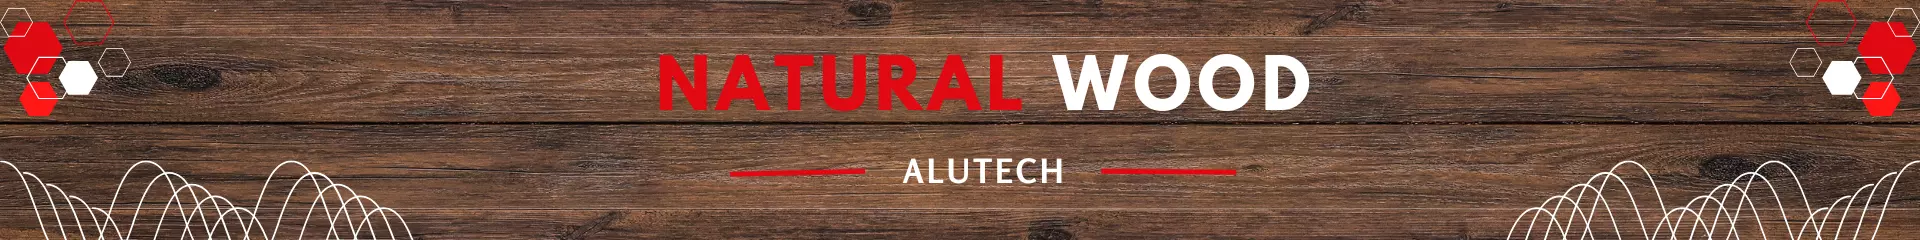 Alutech Natural Wood Banner Image